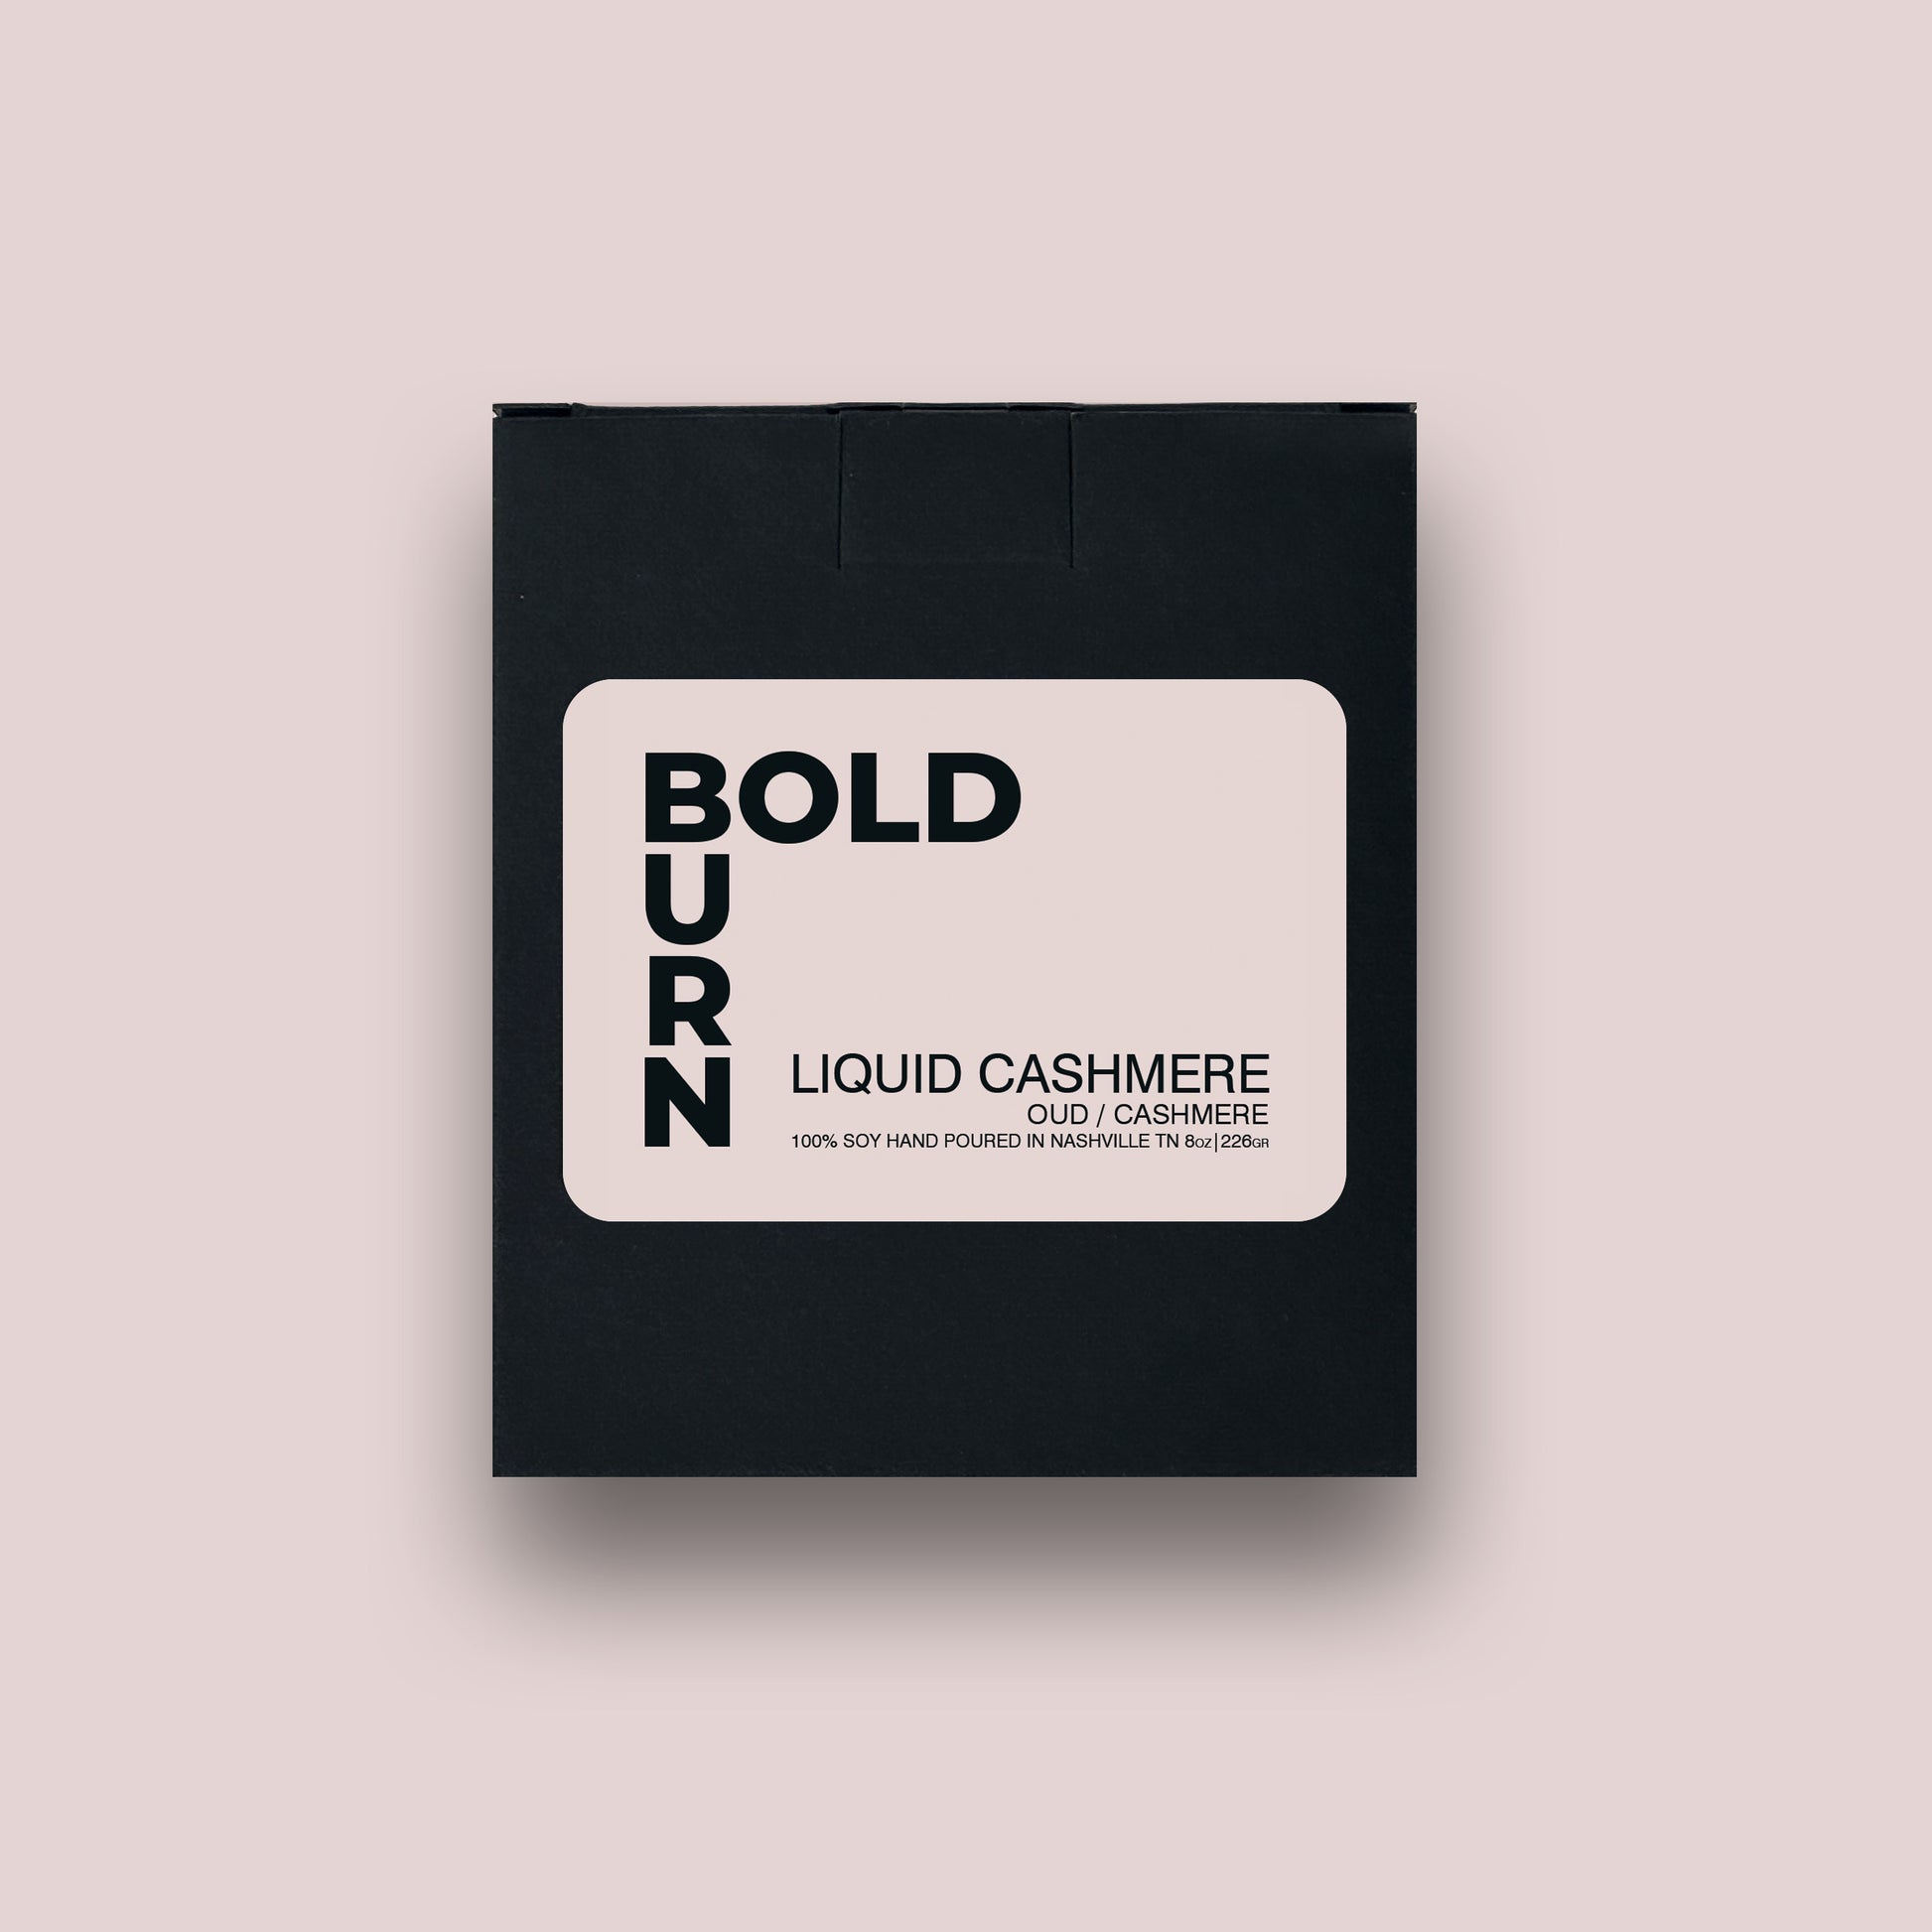 Bold Burn Liquid Cashmere black gift box with white label containing Bold Burn logo and brief product info including Liquid Cashmere and scent notes Oud and Cashmere